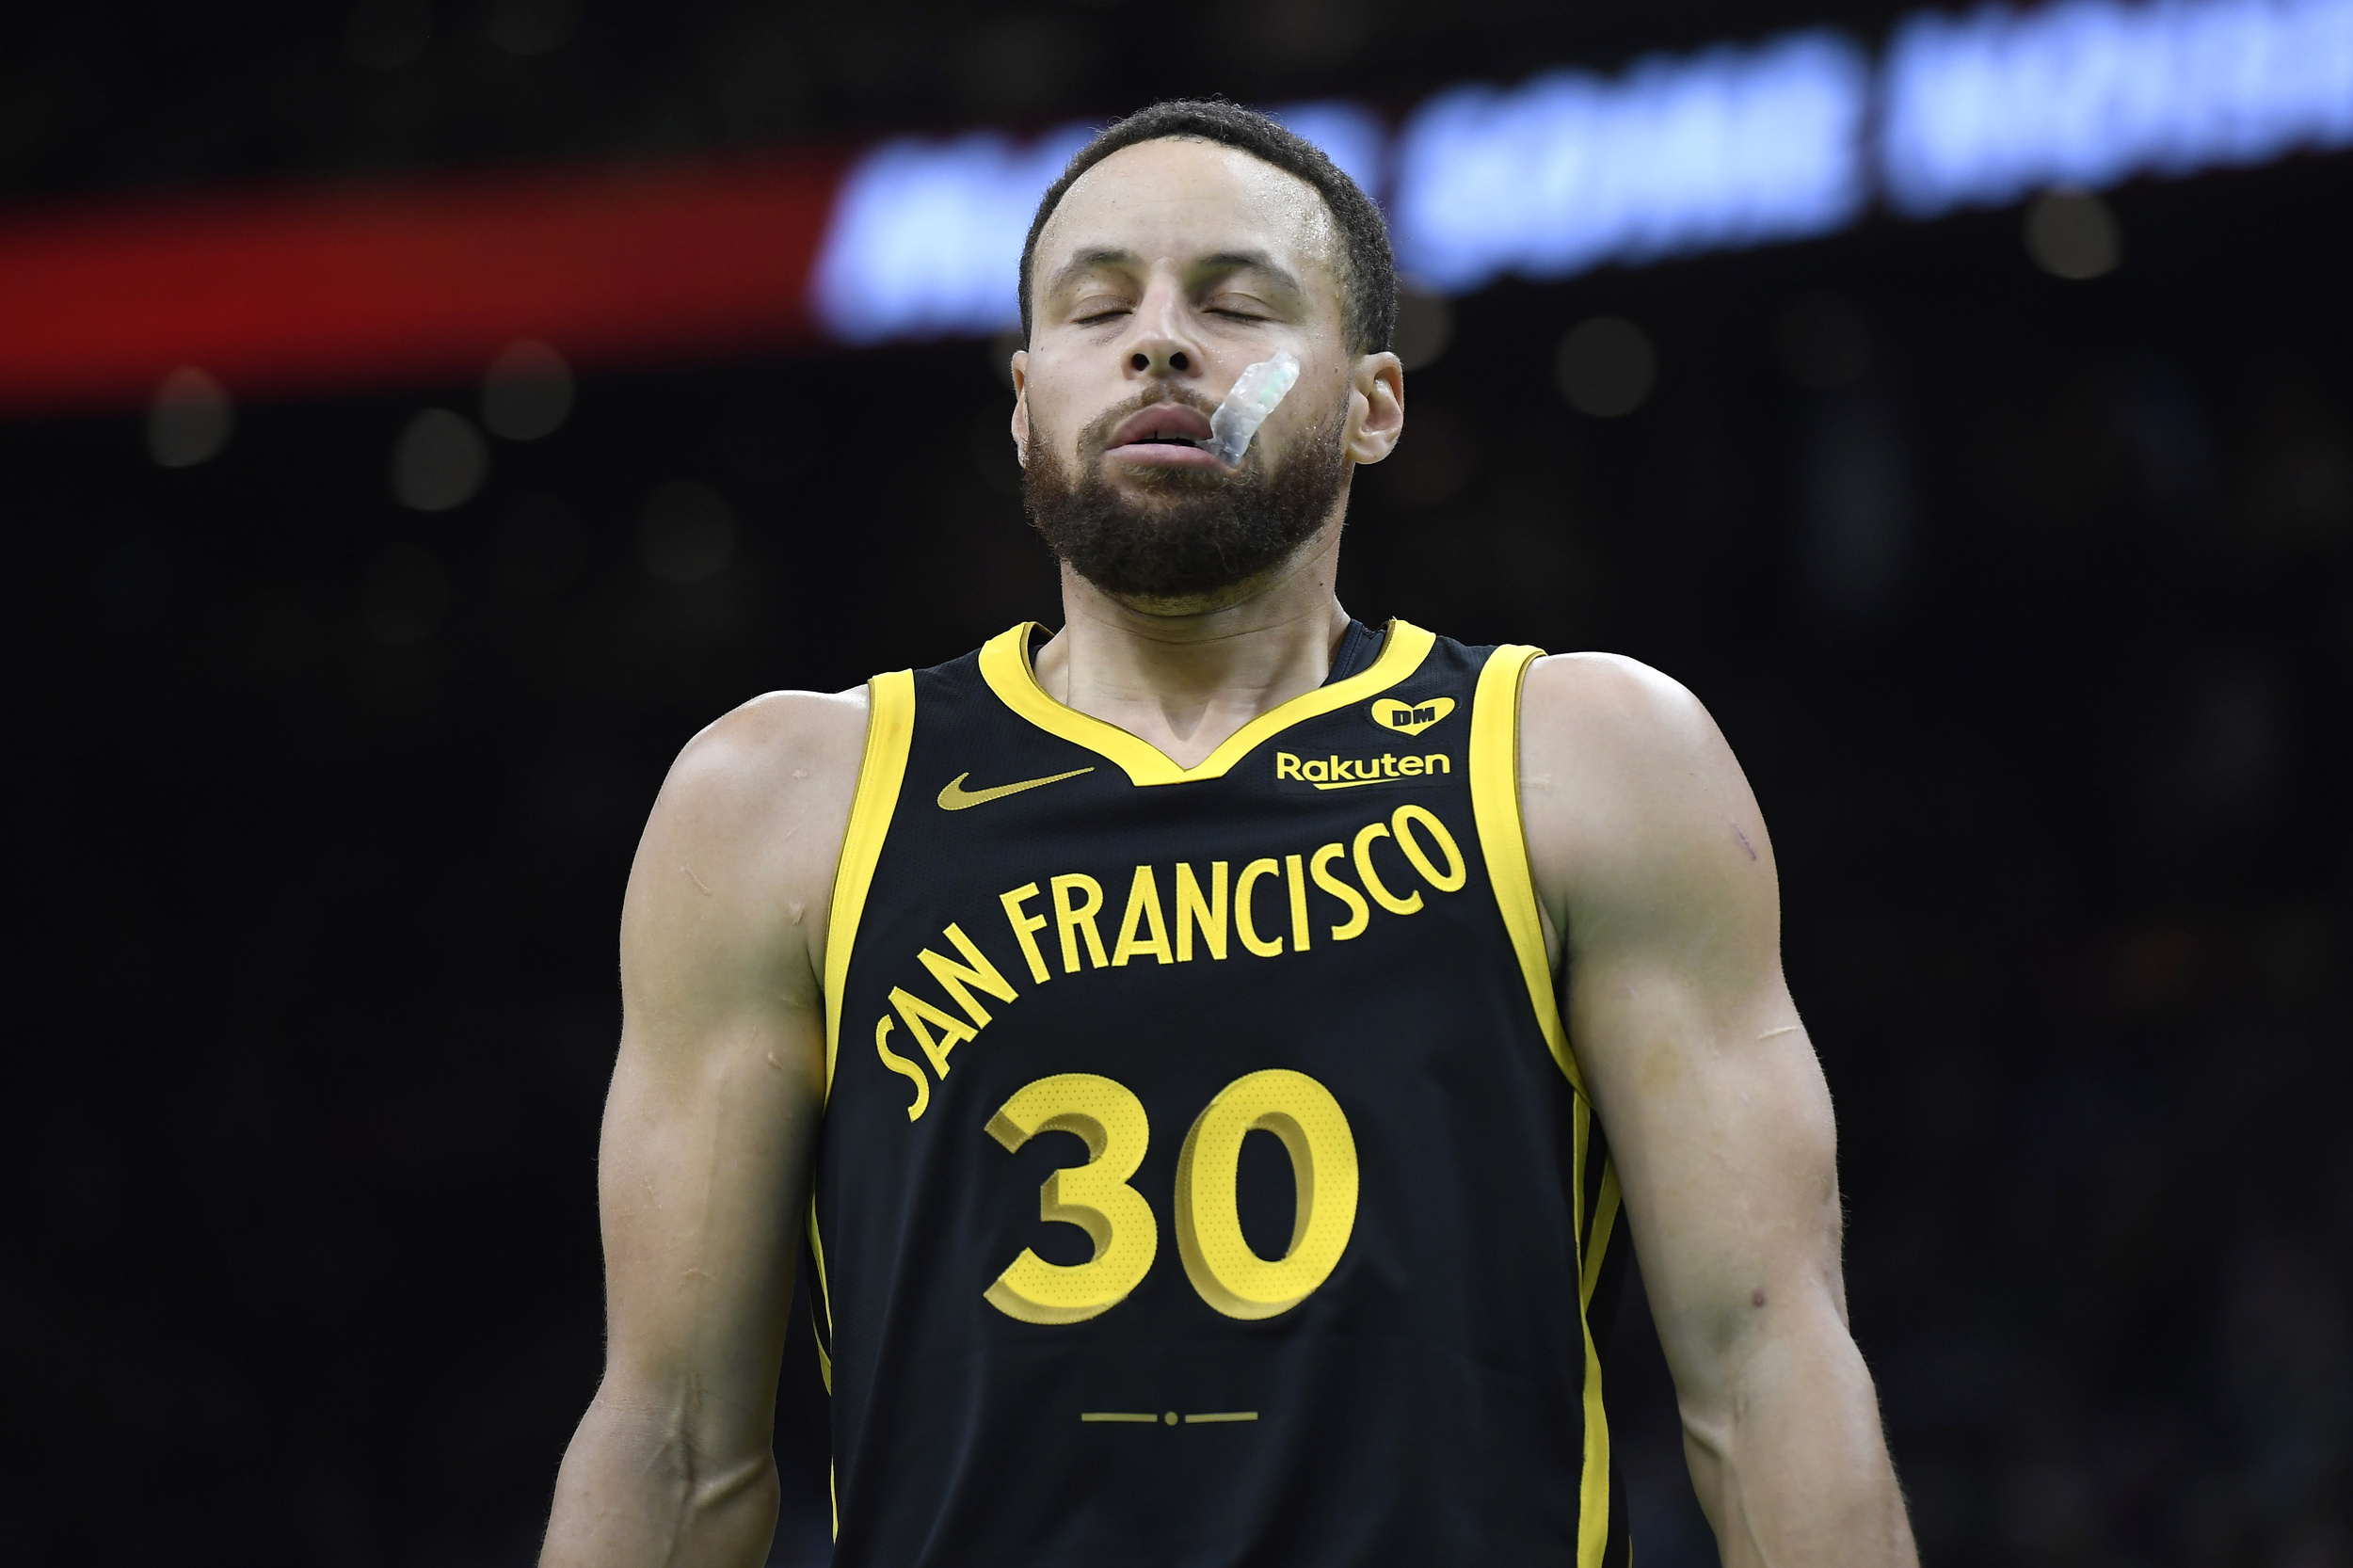 stephen curry: it was ‘joint decision’ between players, coaches to leave jaylen brown open from 3